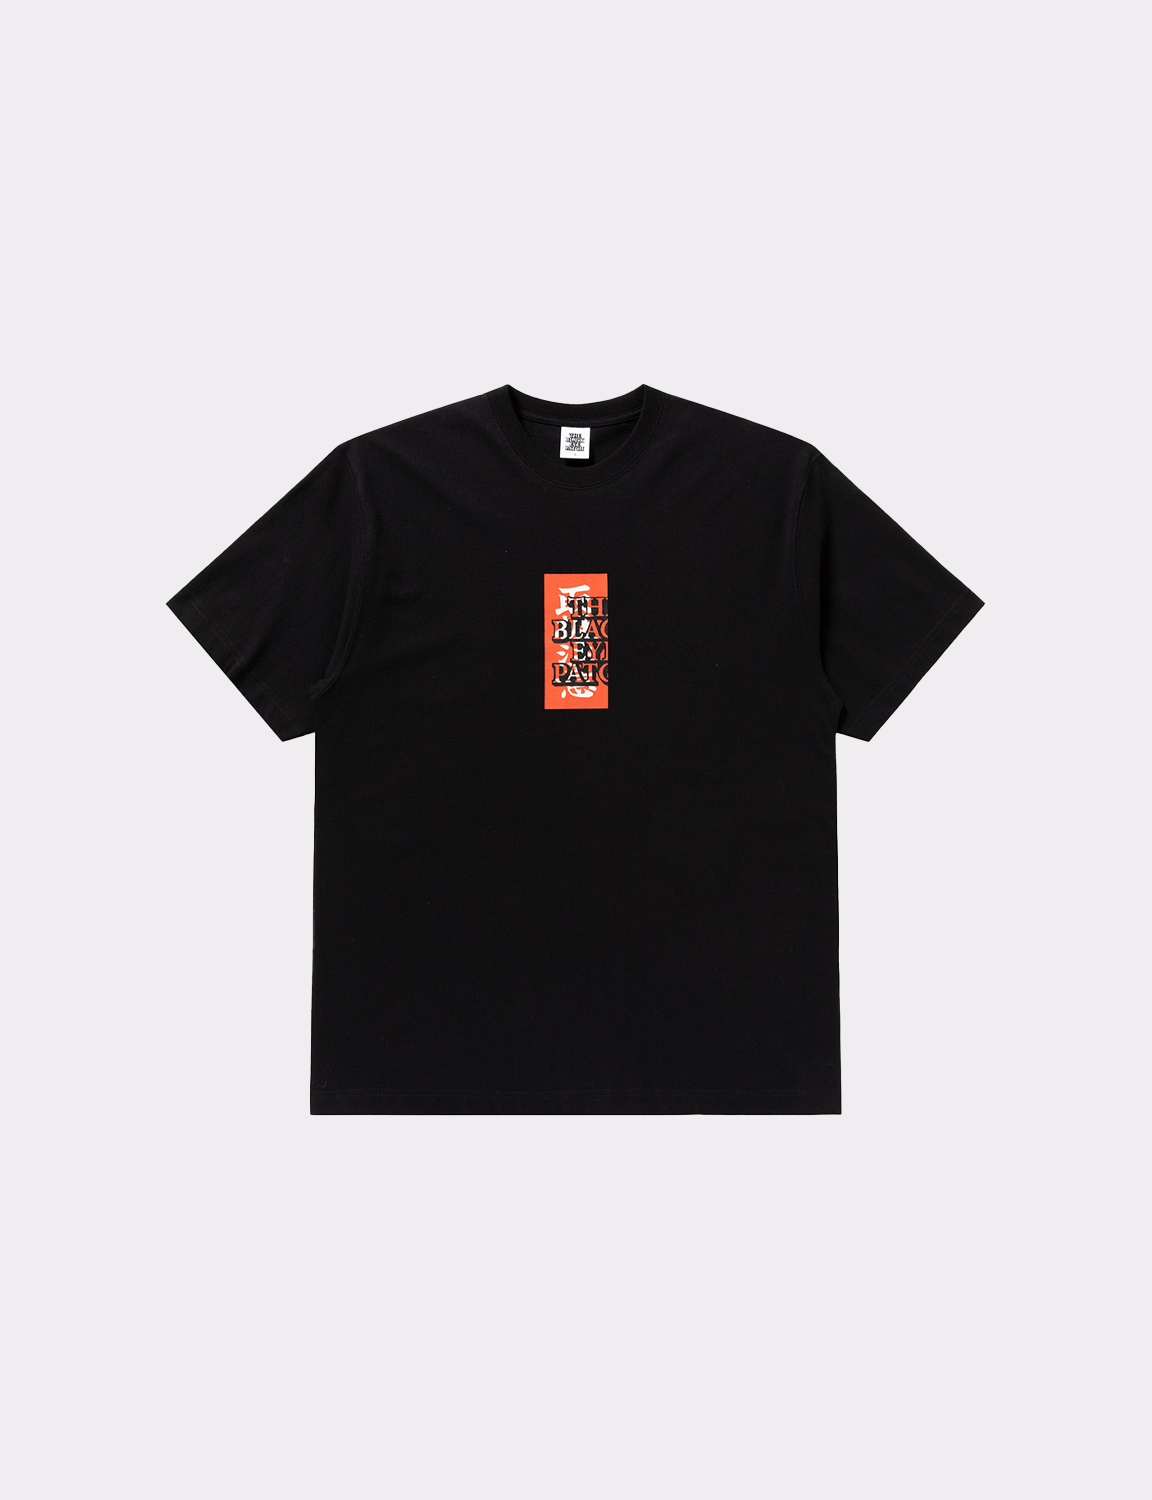 HANDLE WITH CARE TEE BLACK